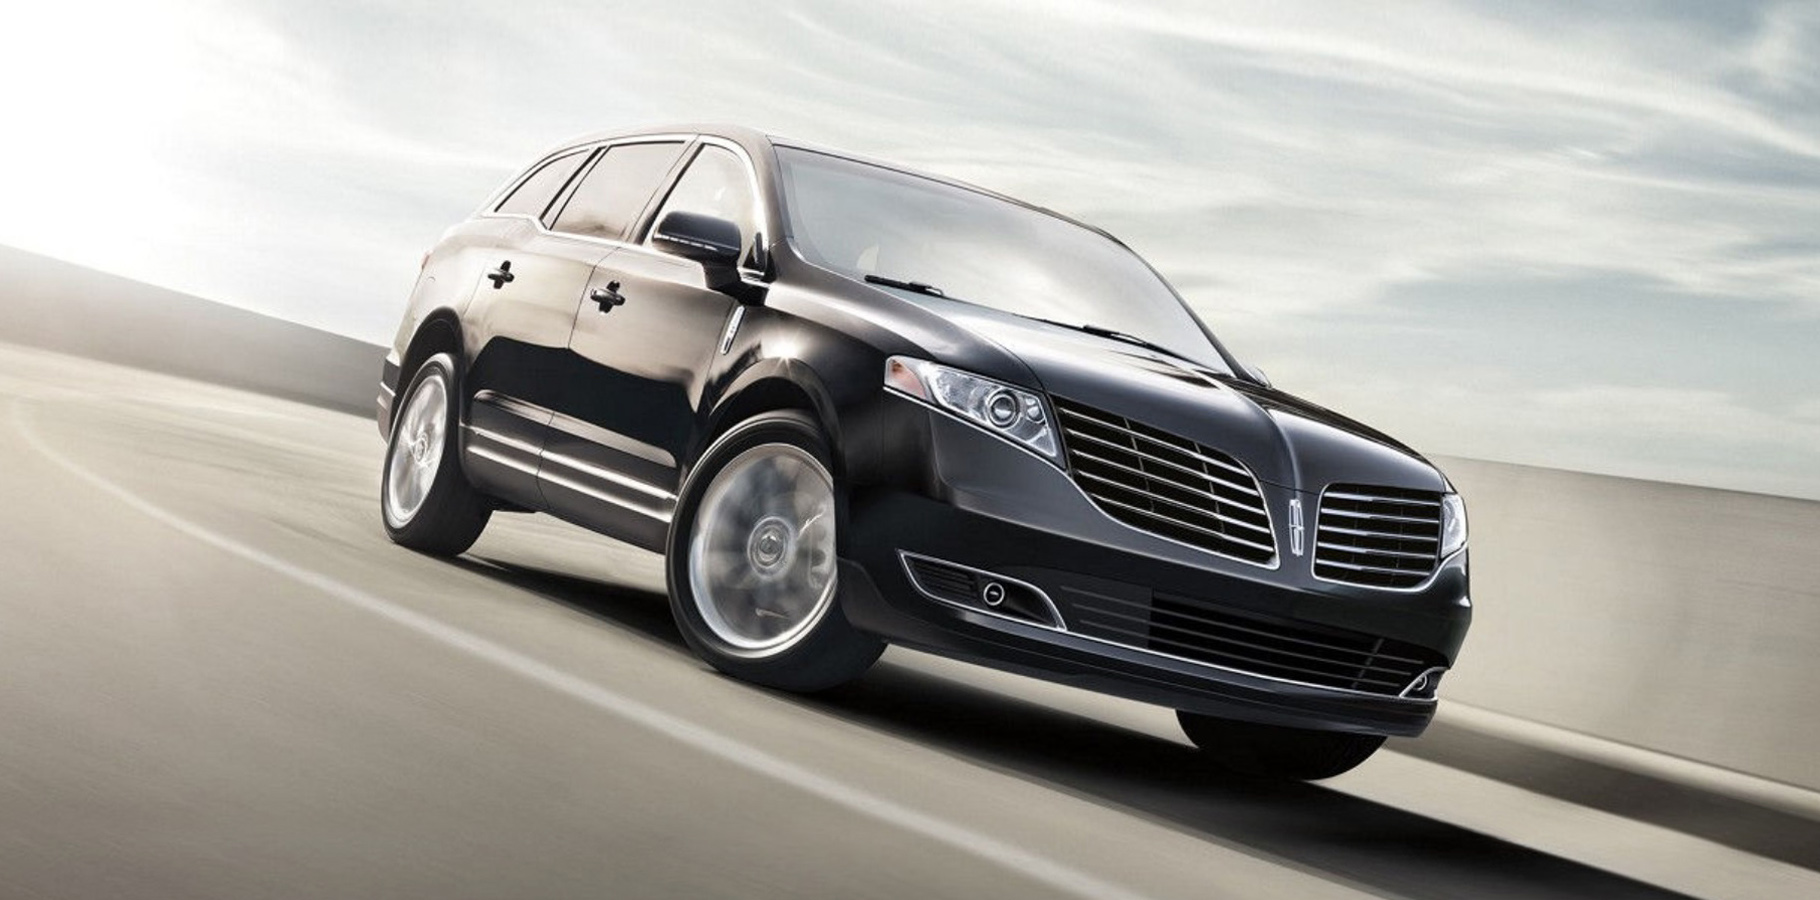 Lincoln MKT sedans are still highly demanded by corporate and business travelers